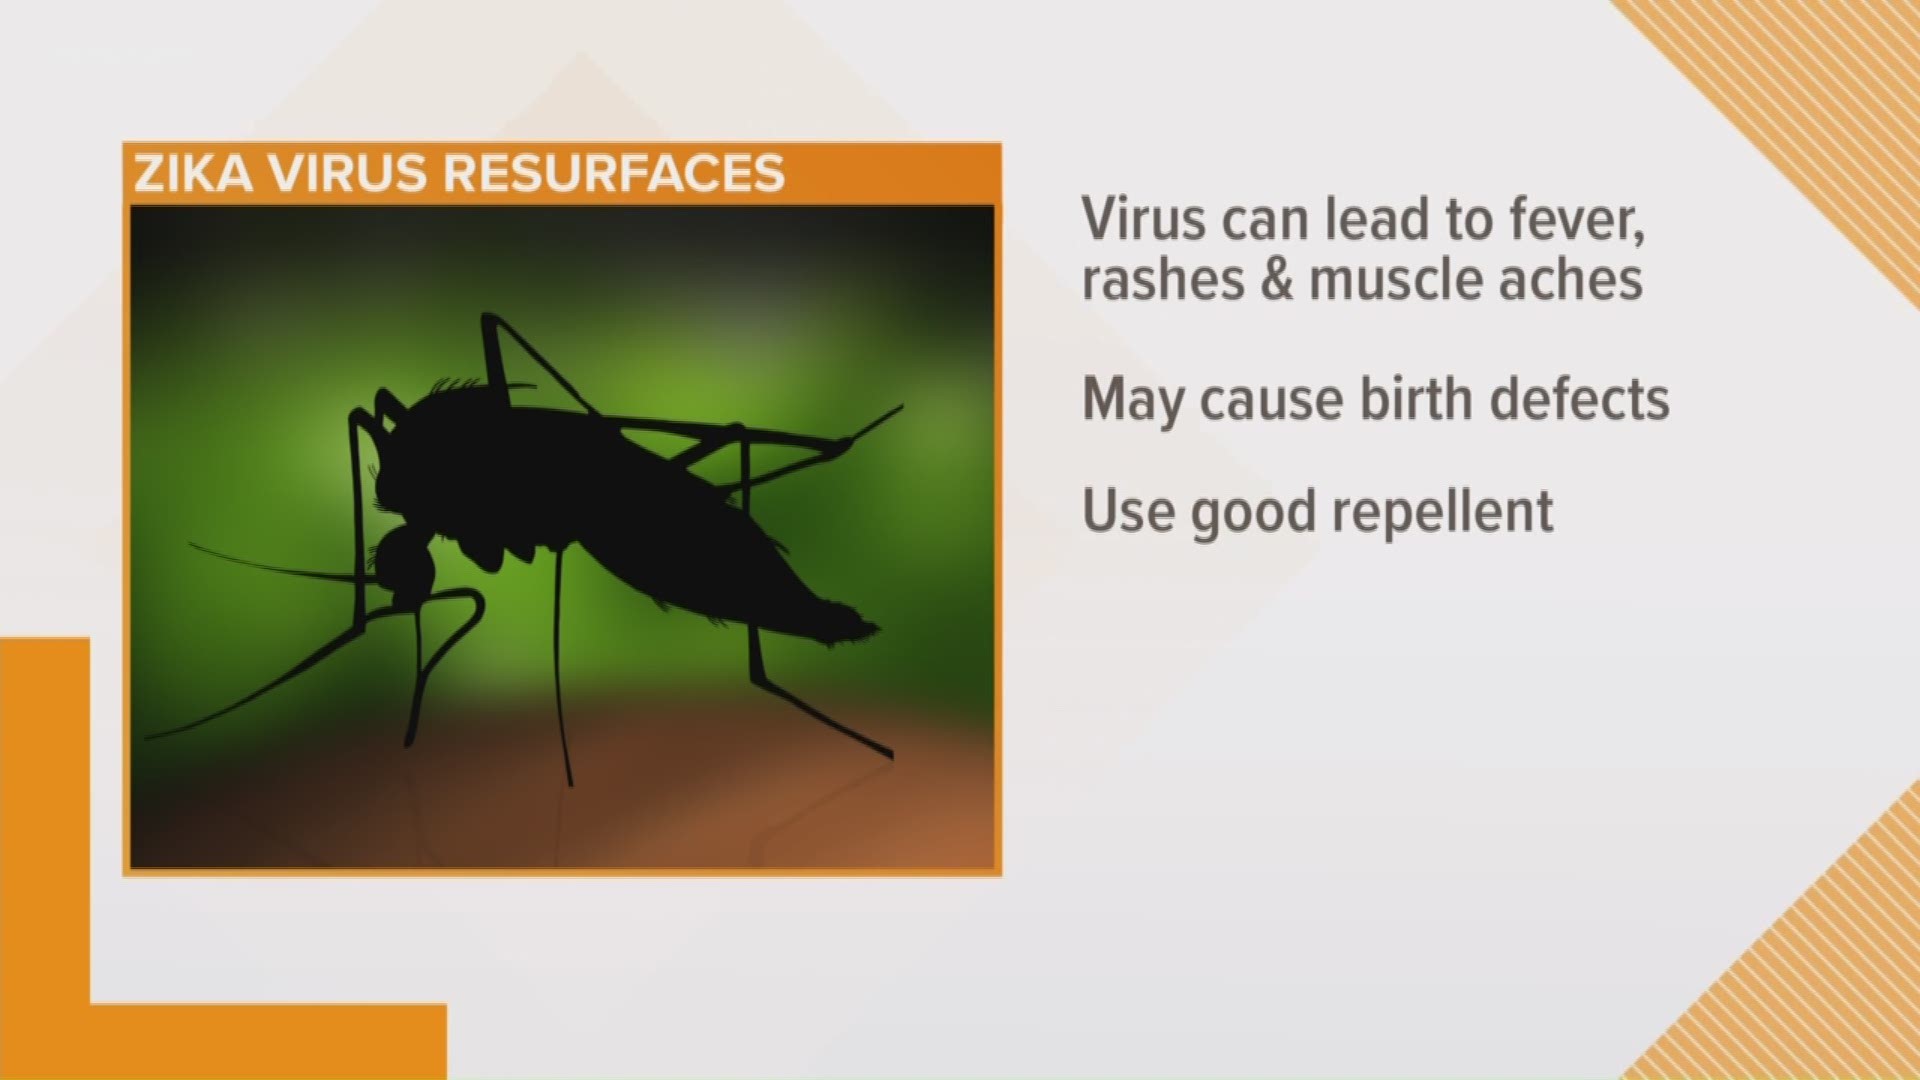 Protecting yourself against the zika virus in Texas